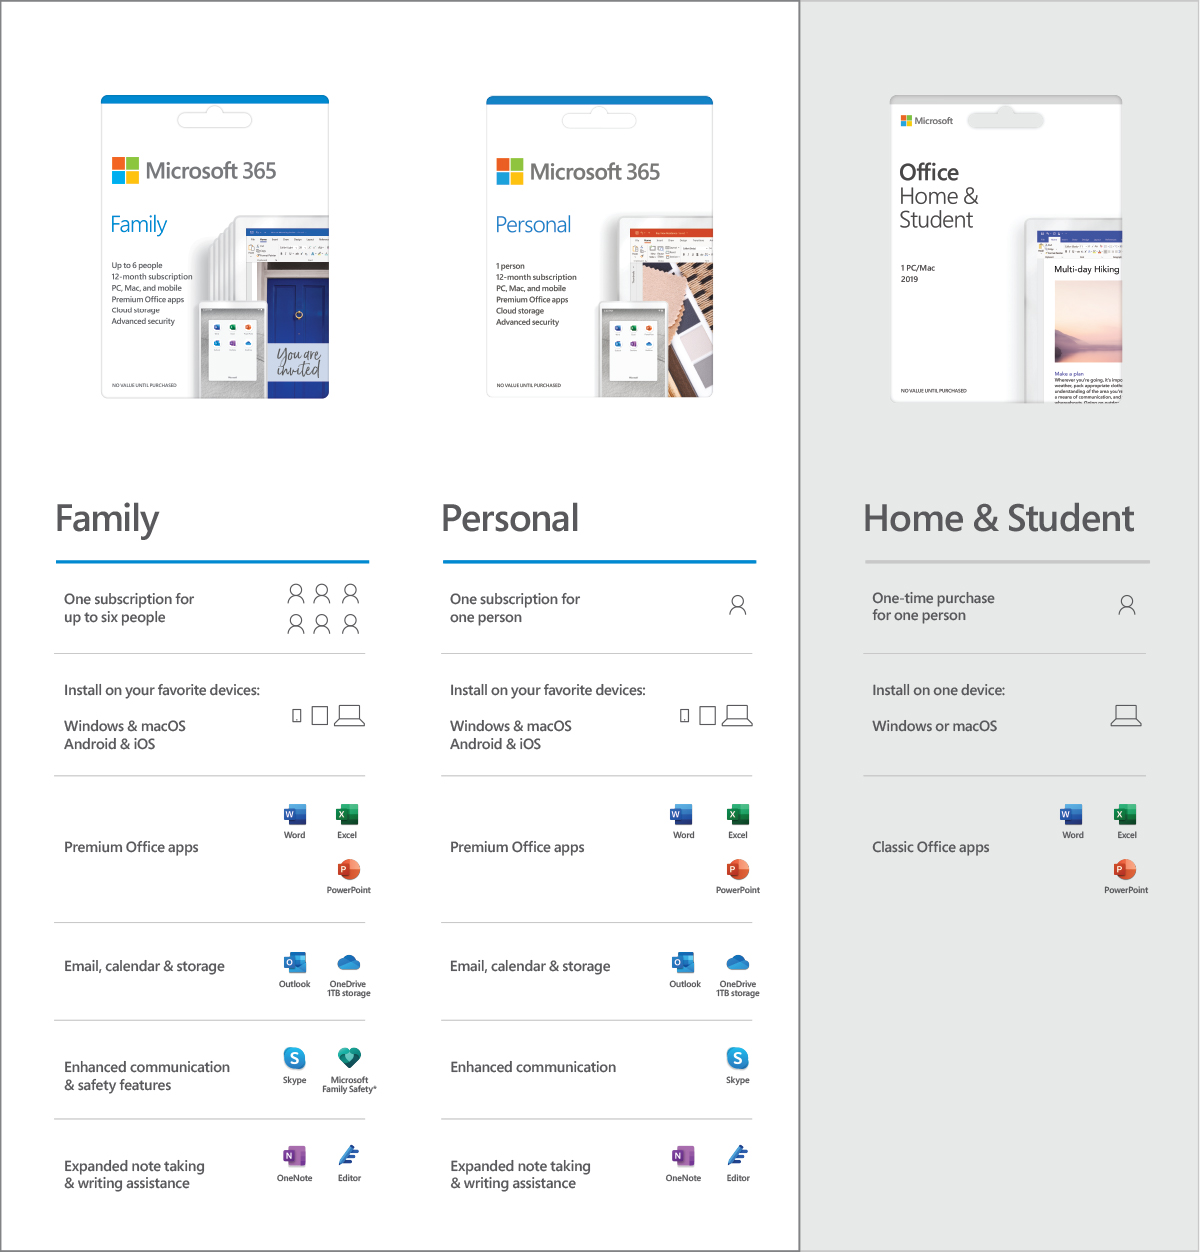 Microsoft Office Home and Student 2019 | 1 device, Windows 10 PC/Mac Key  Card